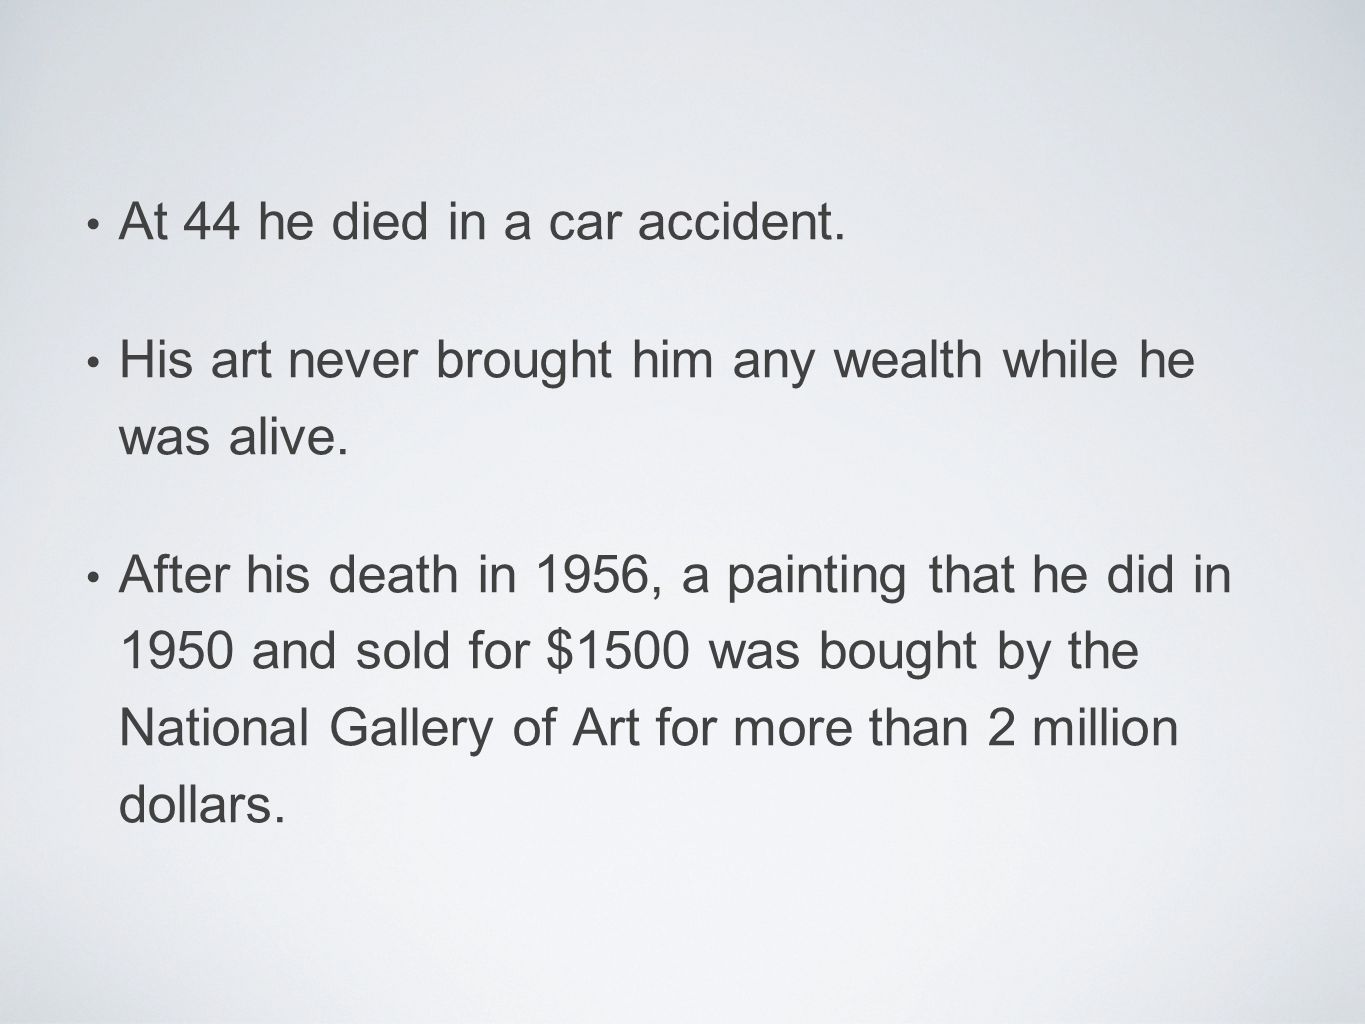 At 44 he died in a car accident. His art never brought him any wealth while he was alive.